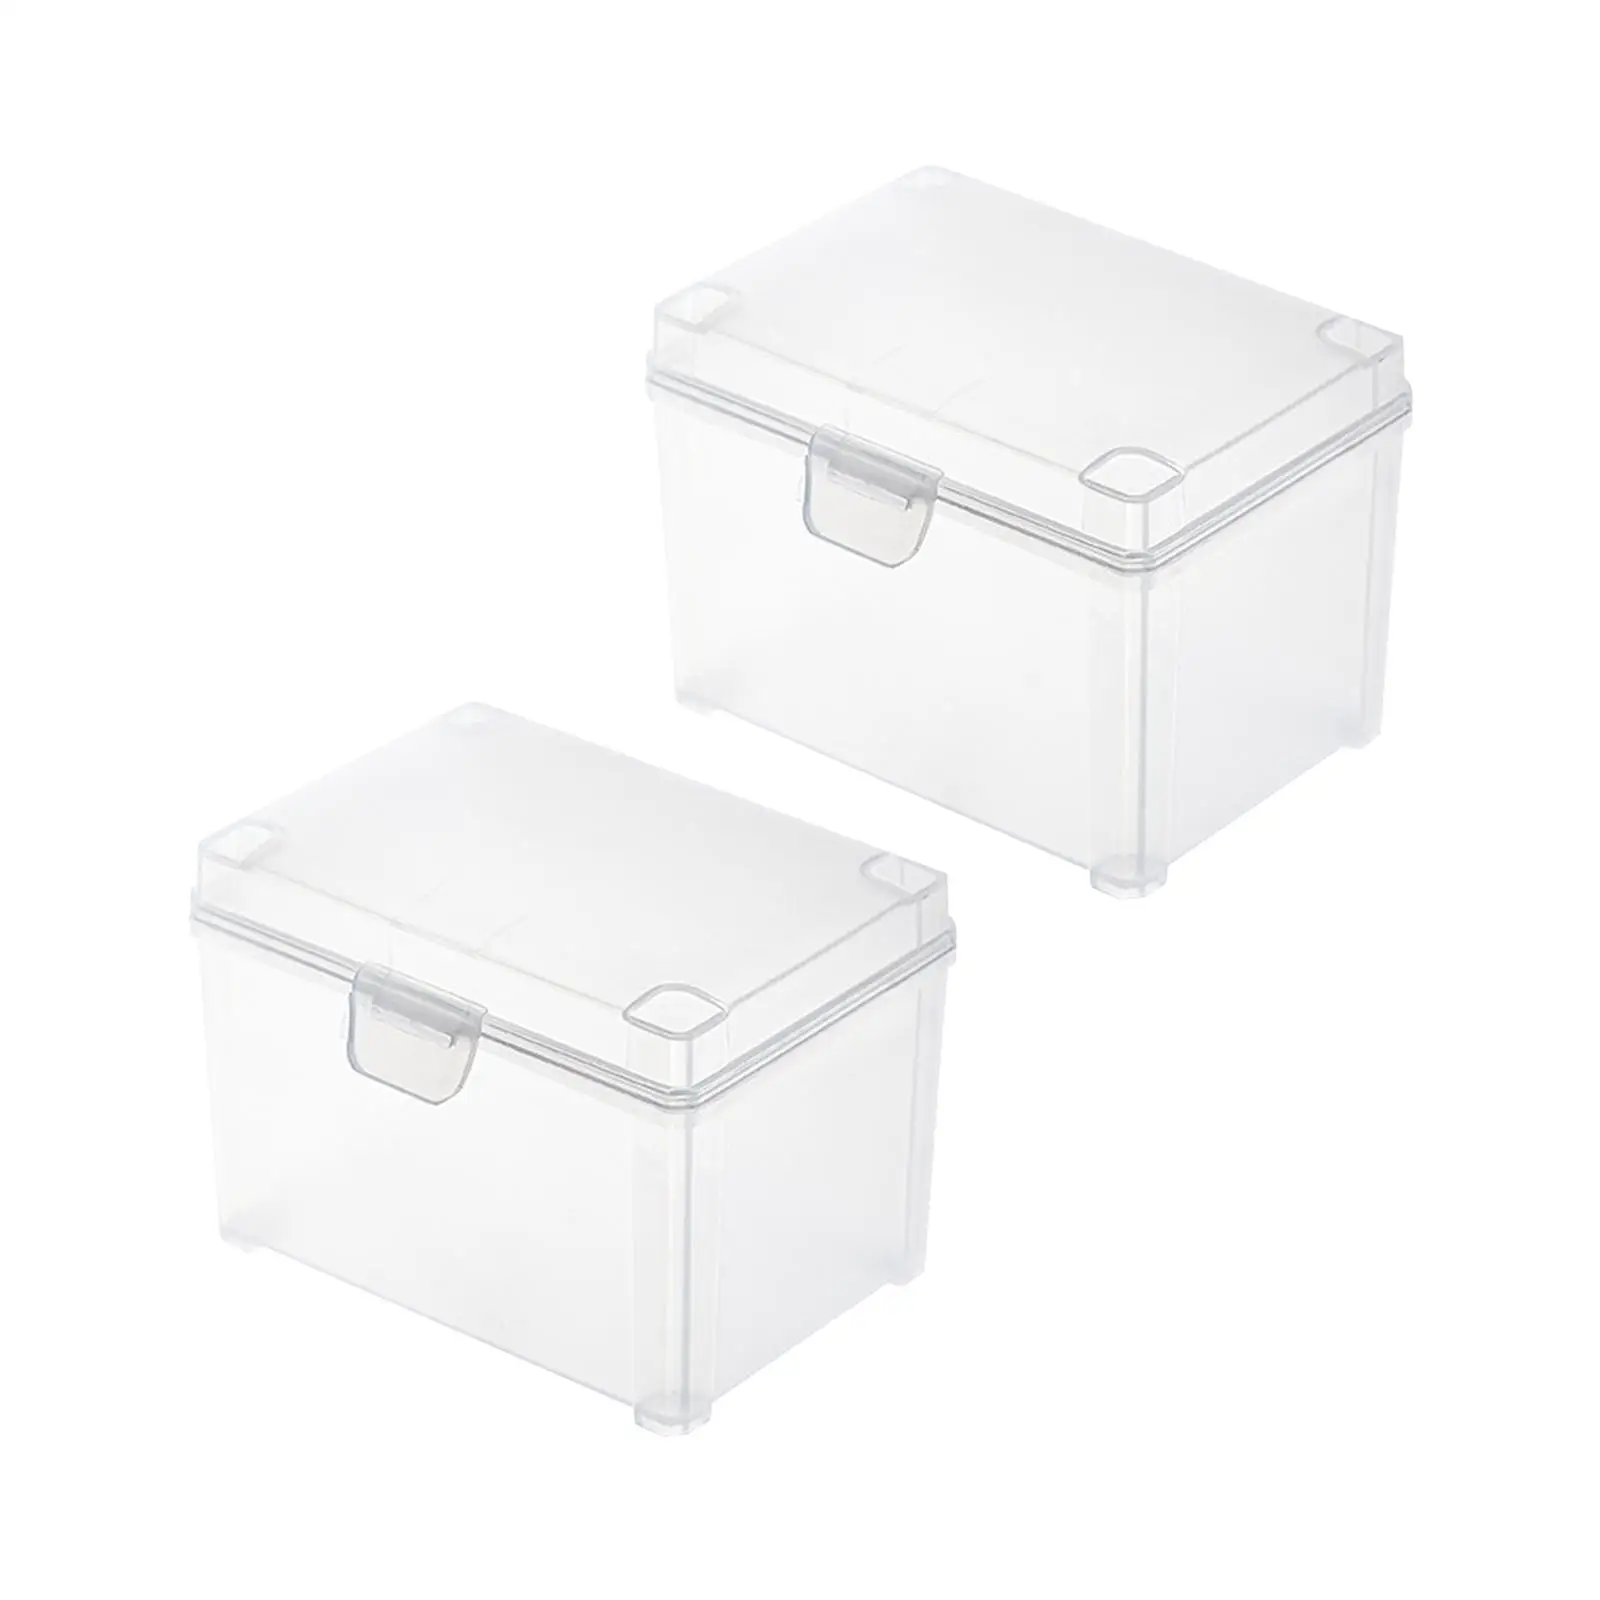 2x Small Stackable Boxes Container Rectangle Supplies Durable Saving Space Desktop Organizers for Clips Cards Jewelry Desk Home